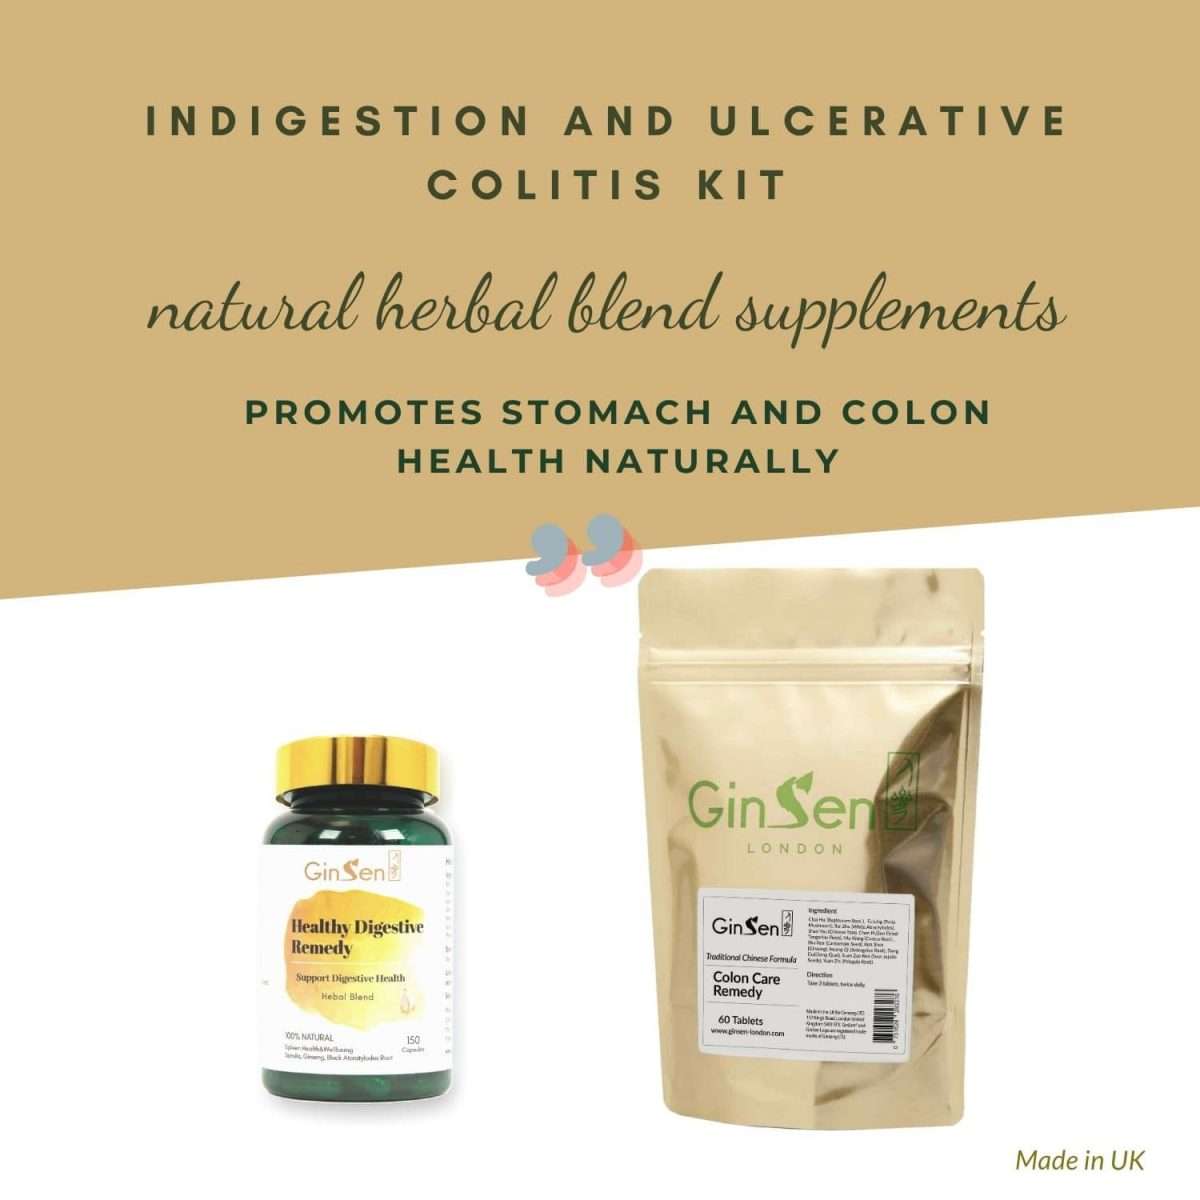 Indigestion and Ulcerative Colitis Kit by GinSen